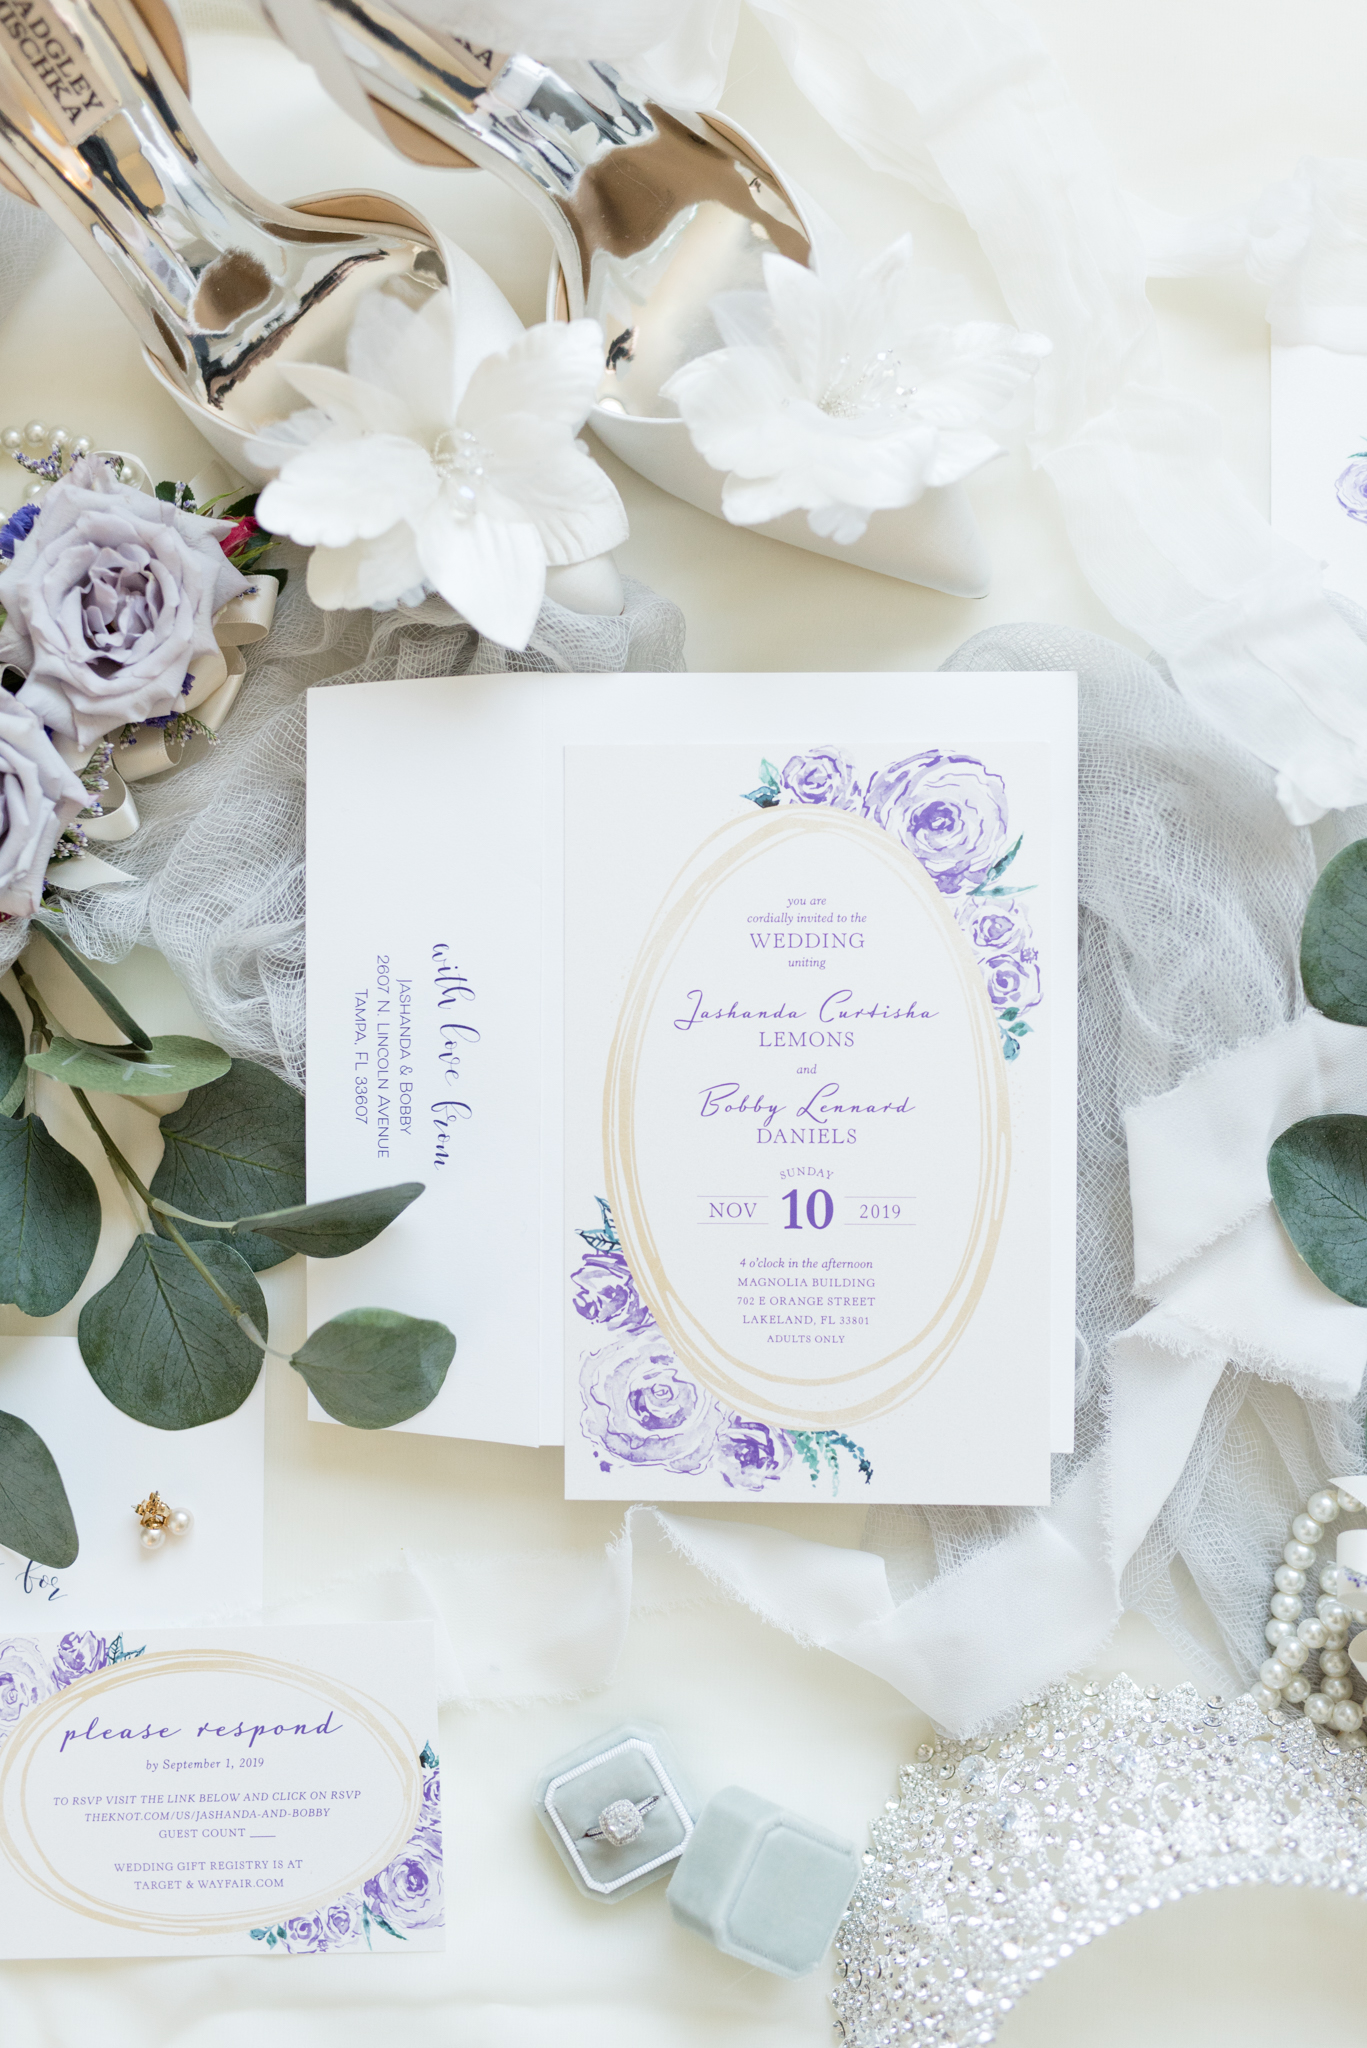 Wedding invitation sits with bridal details.